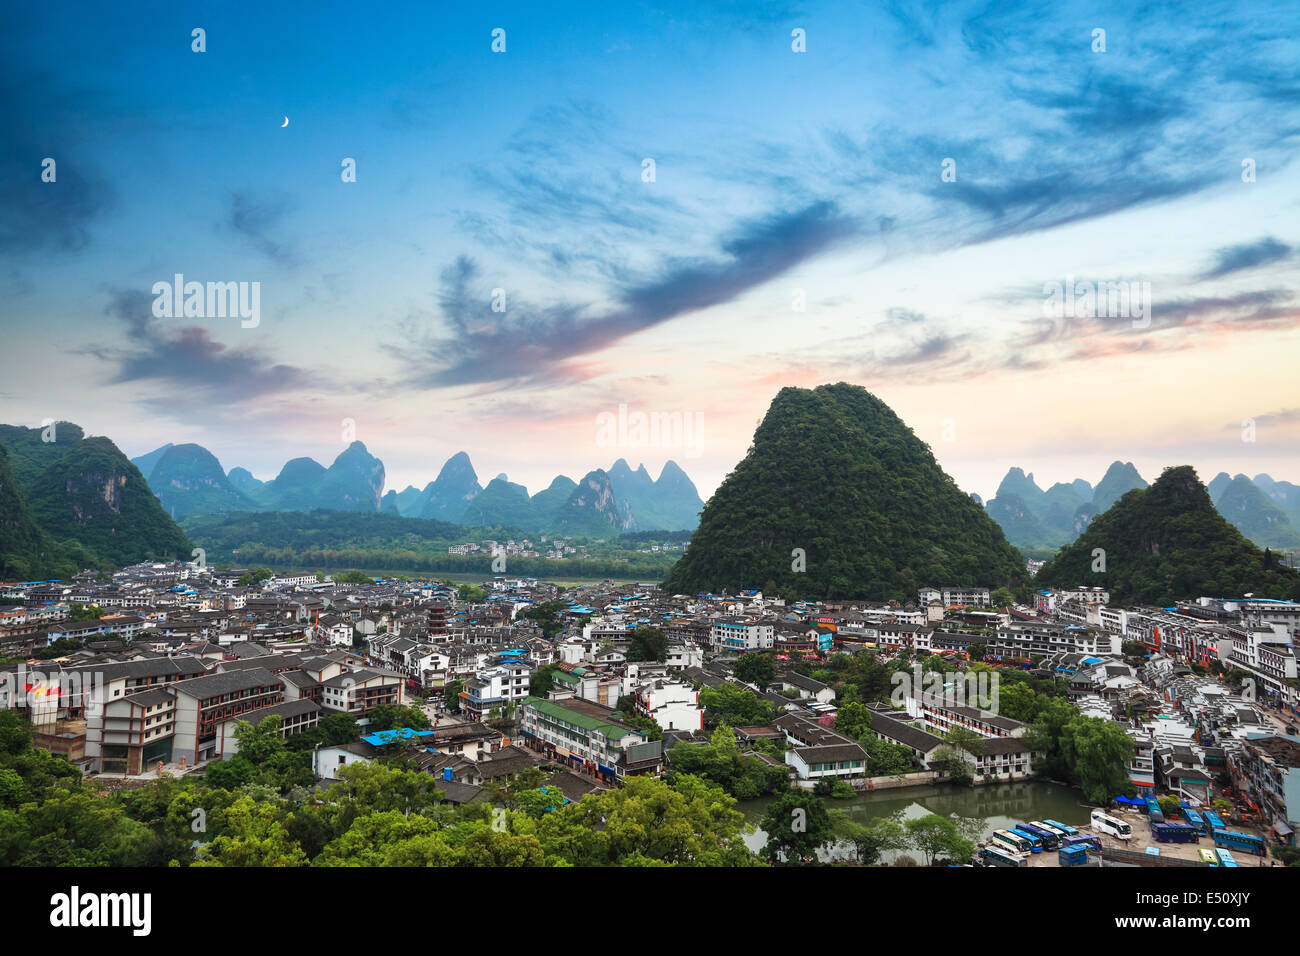 yangshuo county town at sunset Stock Photo